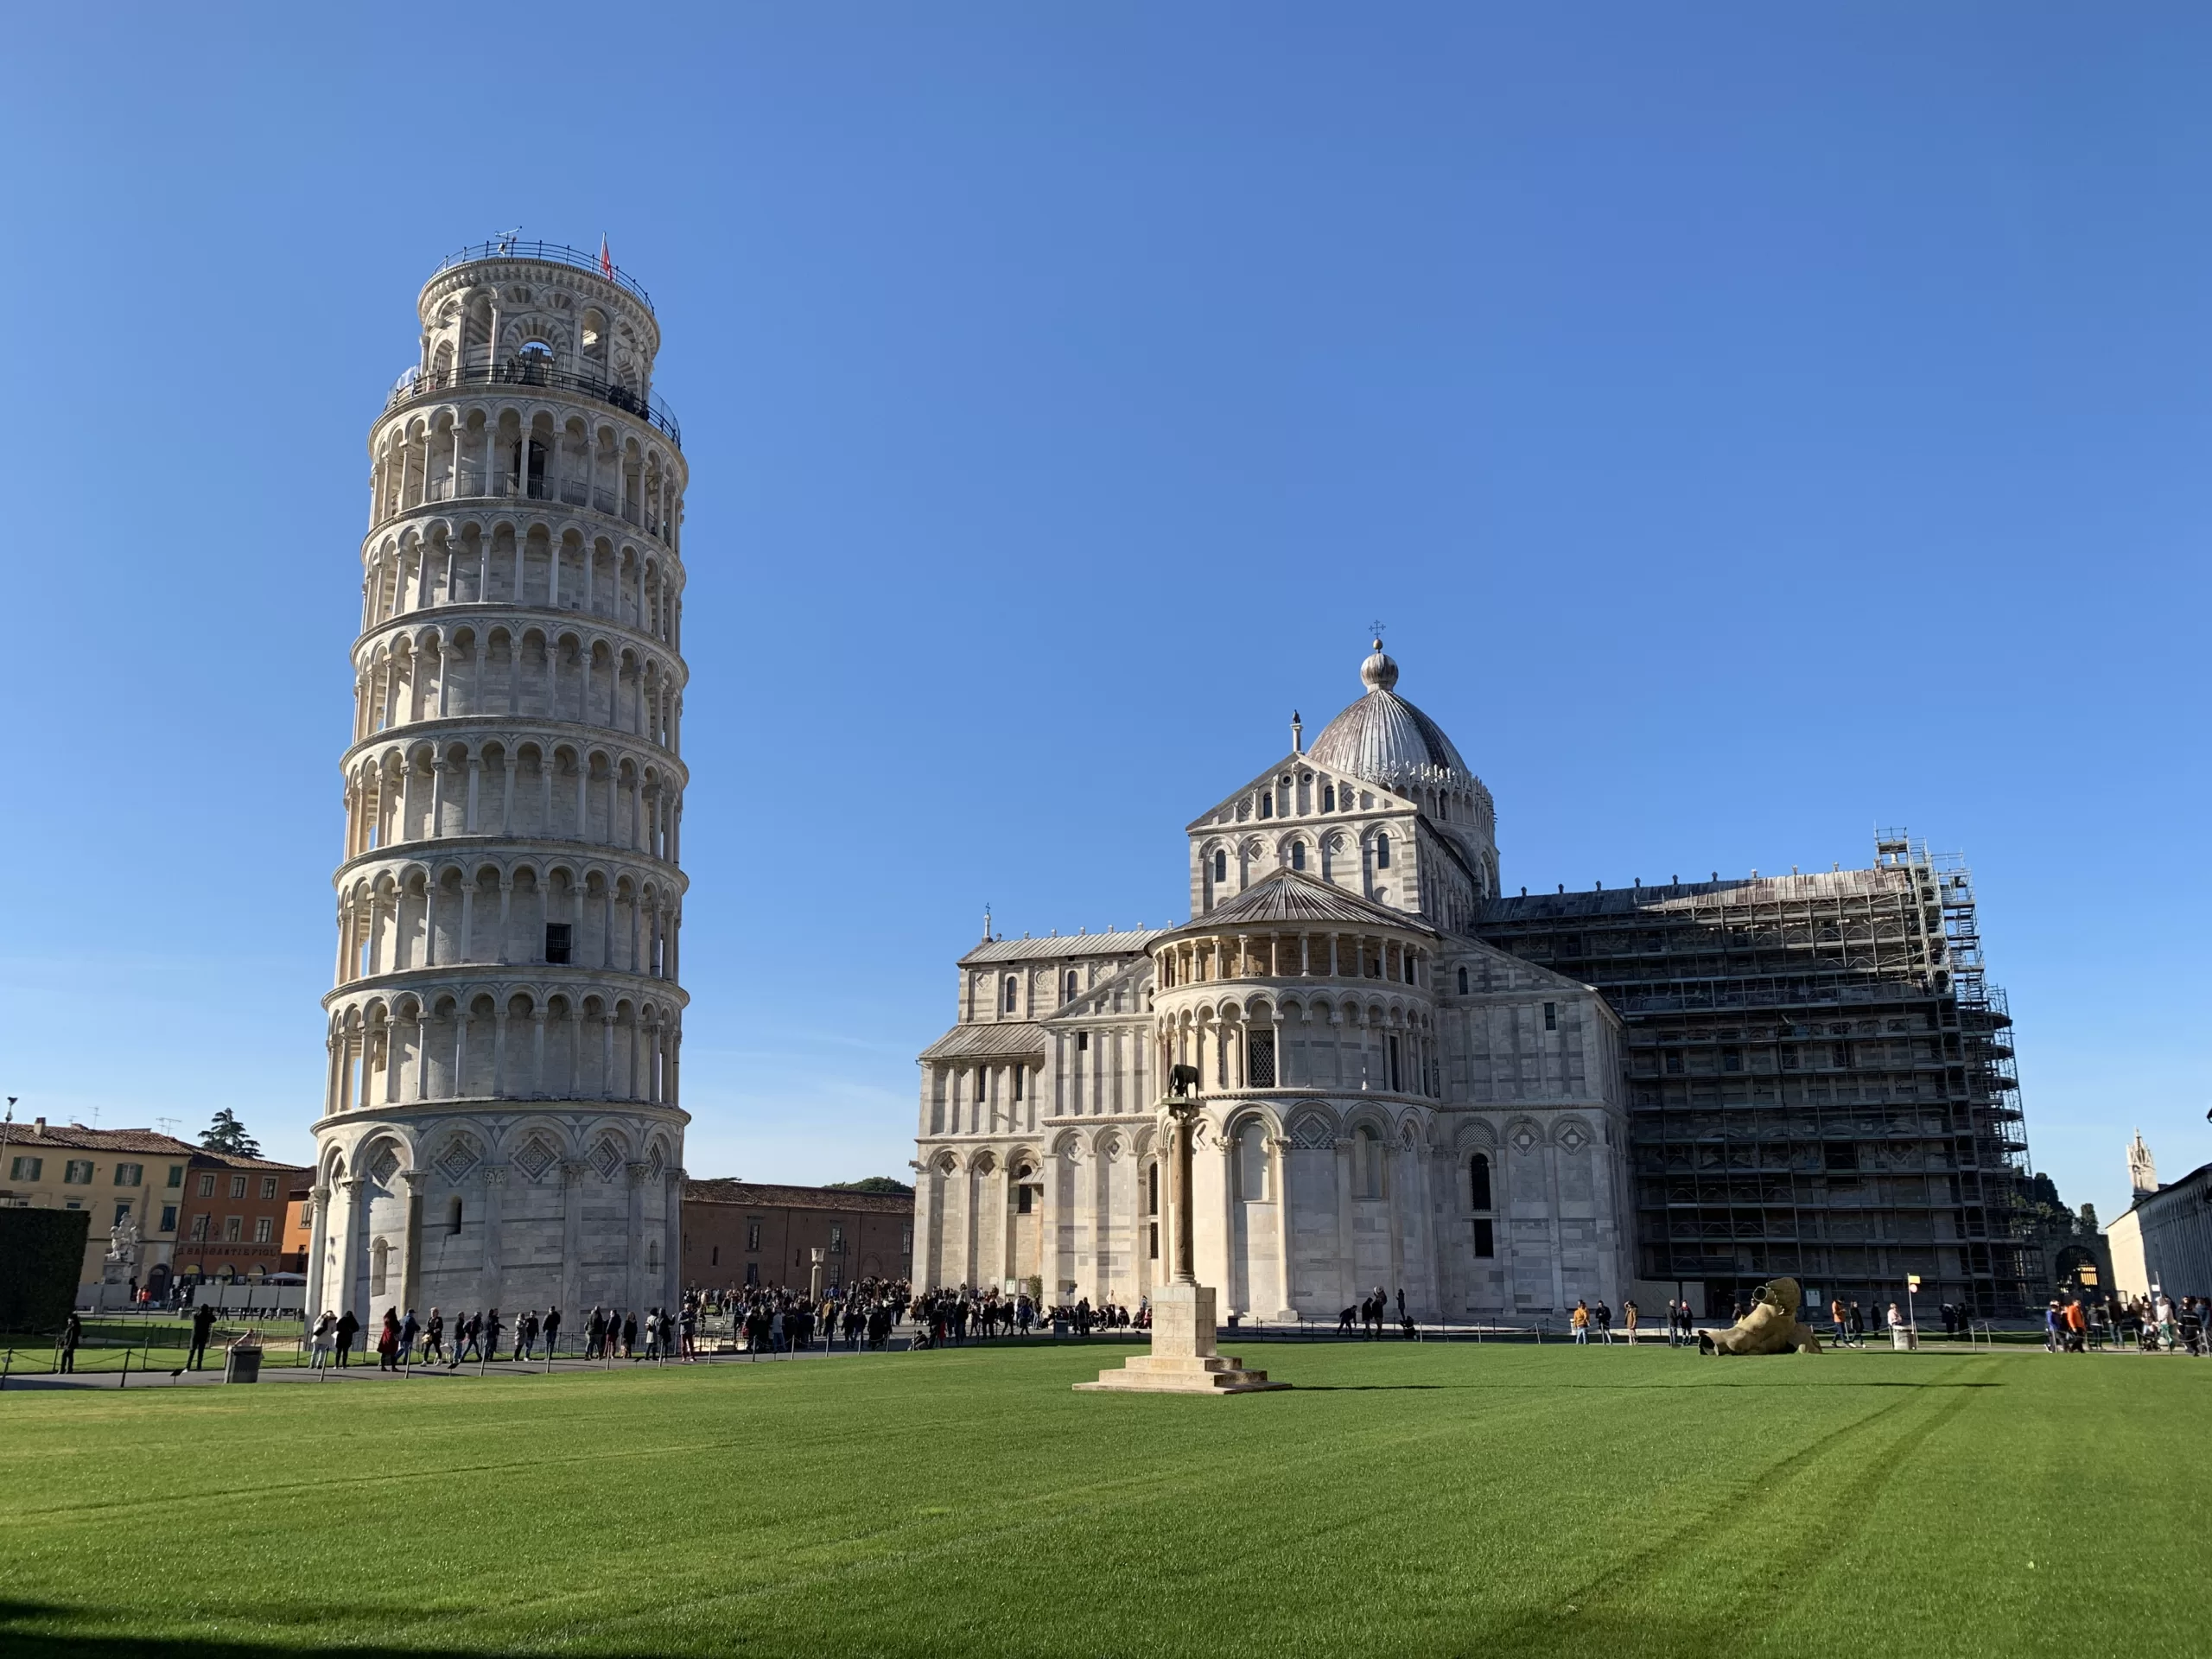 Cover Image of website: Leaning Tower of Pisa, Italy